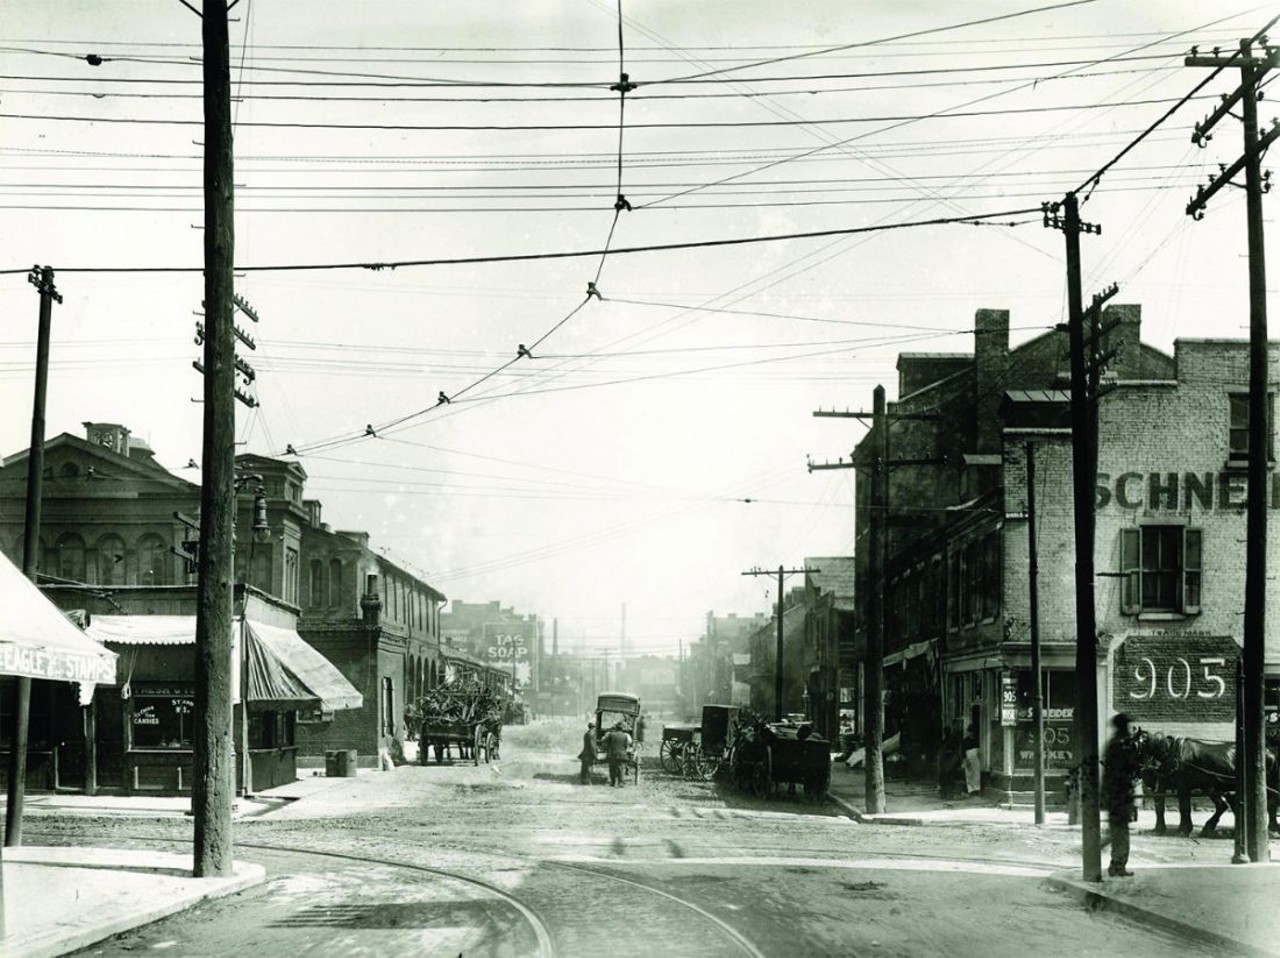 Intersection of Biddle and Thirteenth streets looking north. Photograph, ca. 1900.